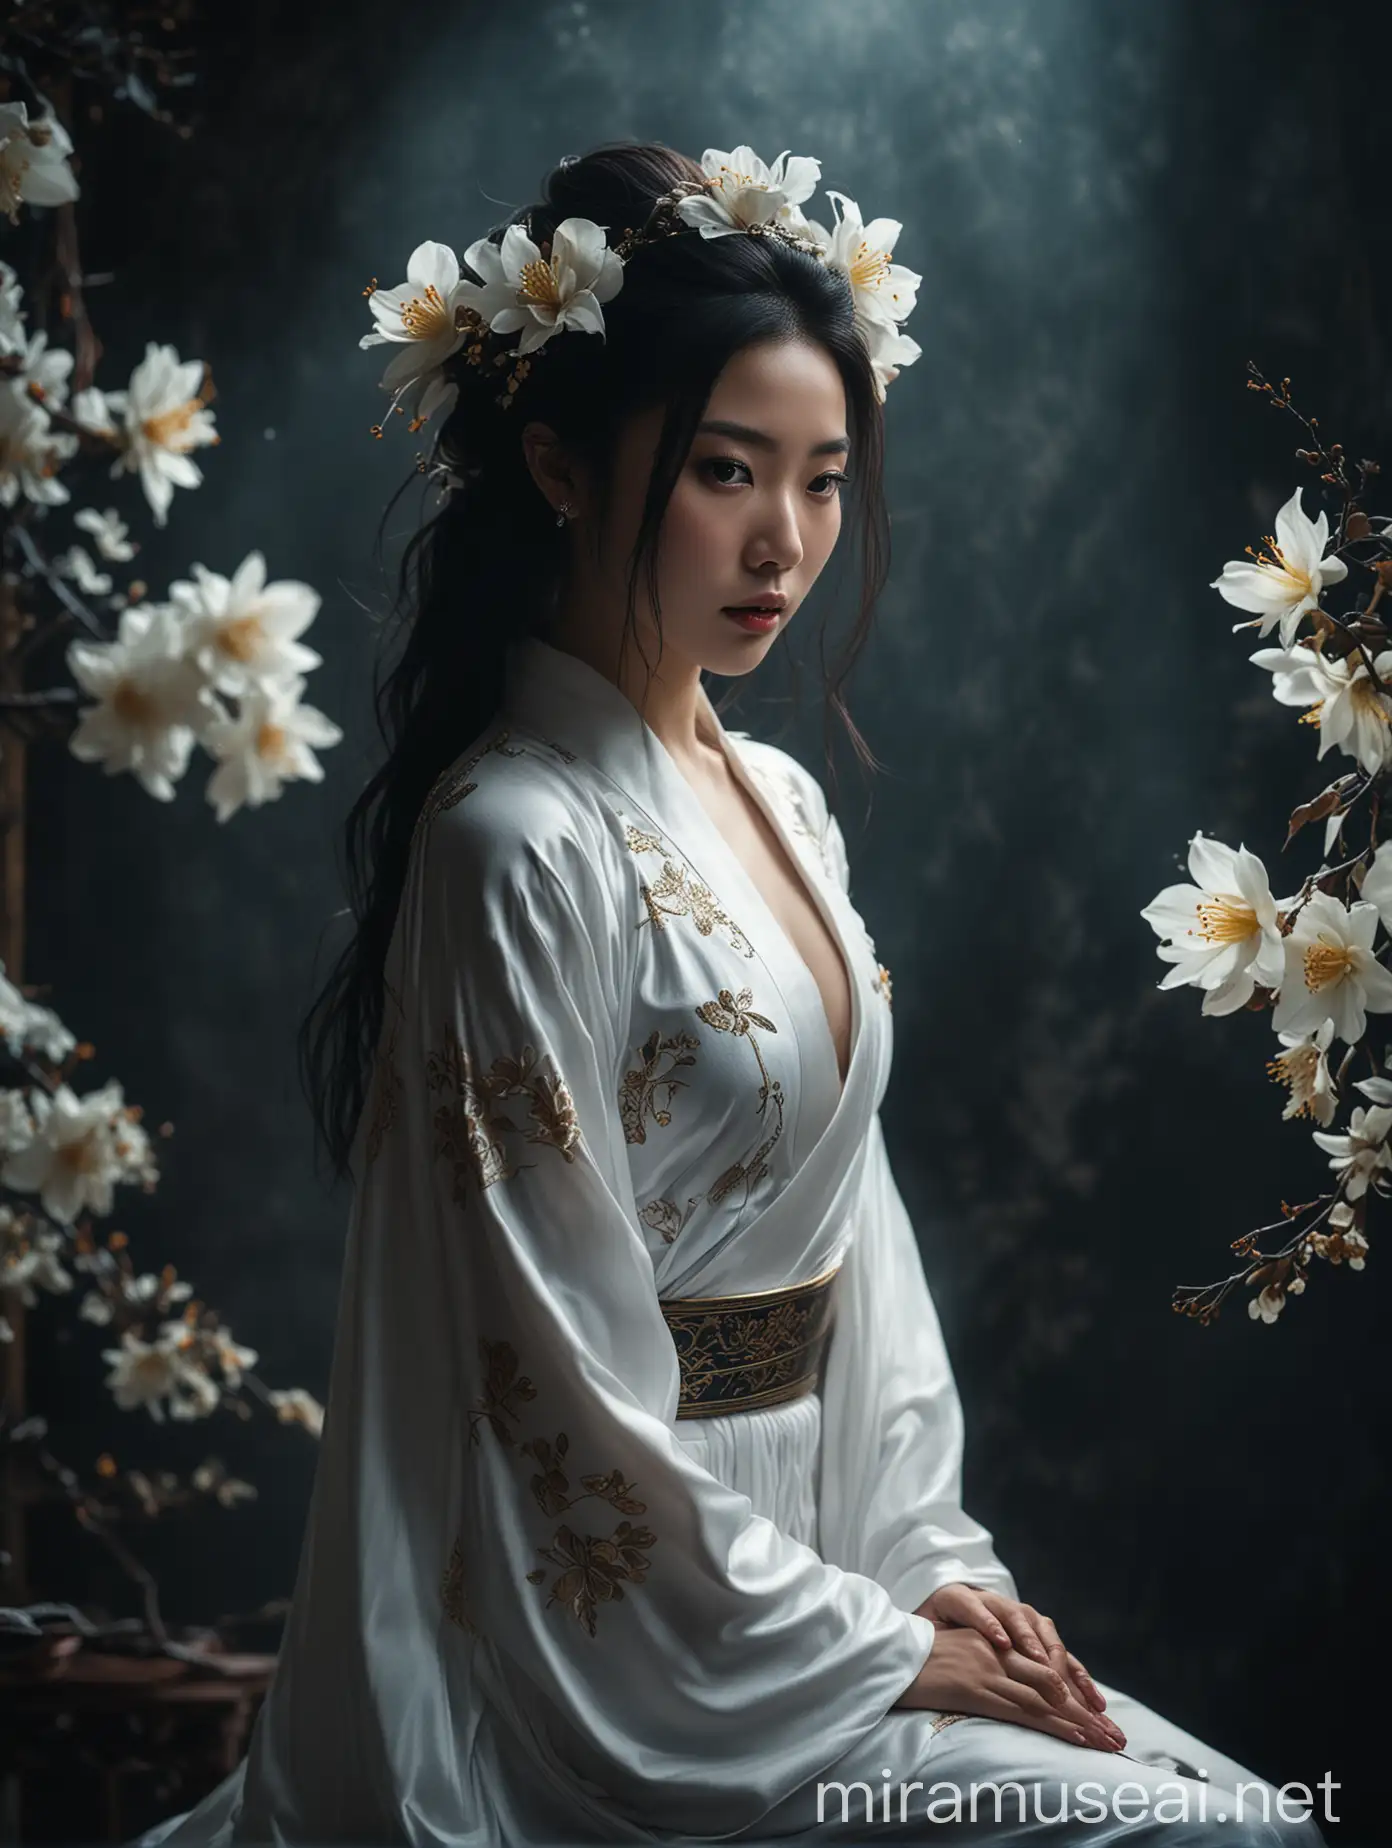 Regal Chinese Princess in Cinematic Portrait with Flowing White Robe and Flowers